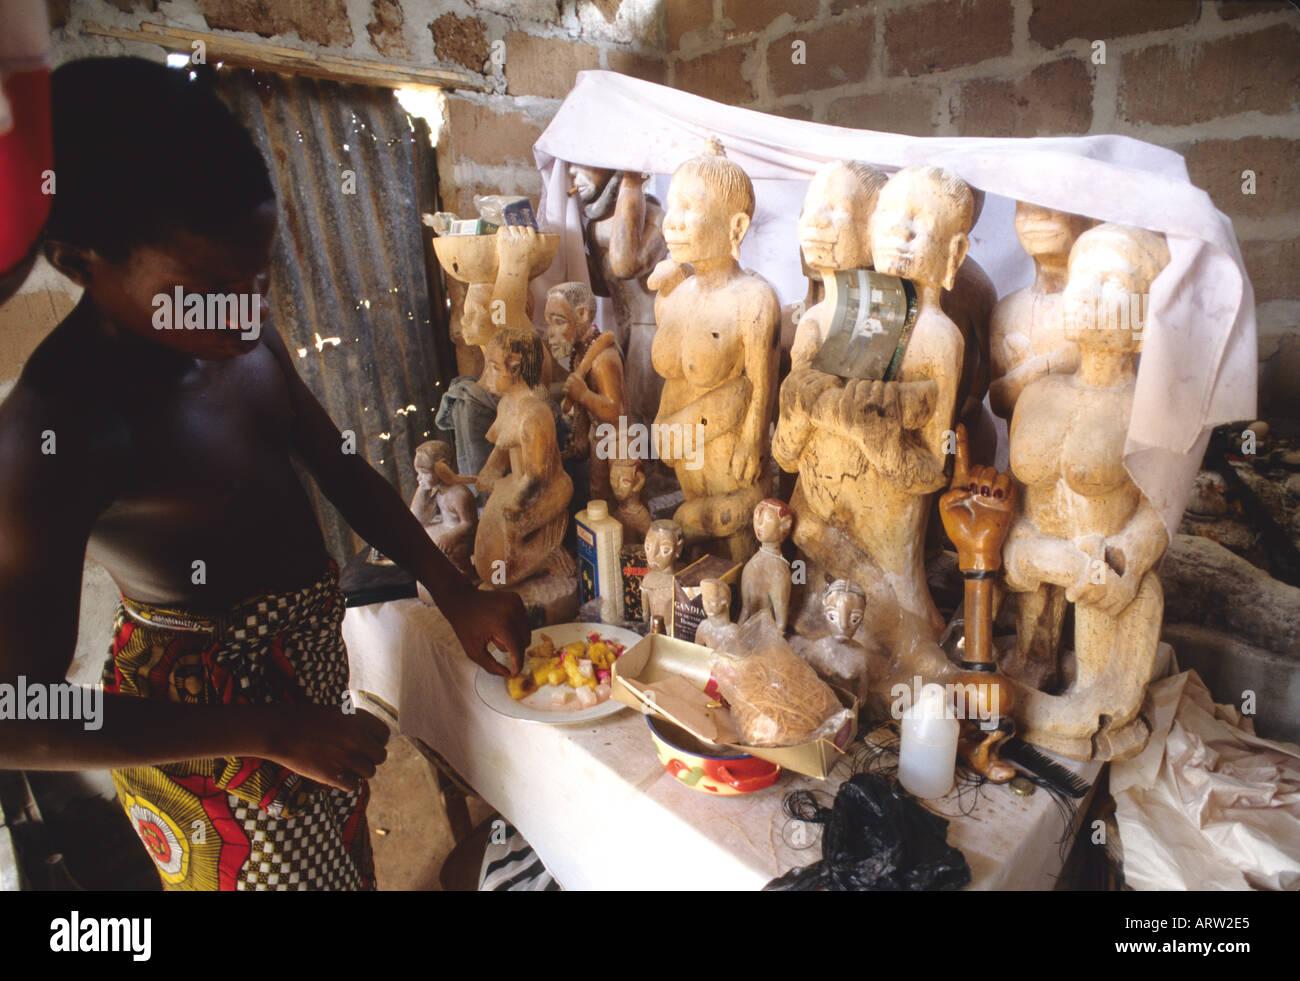 A Mami Wata altar in the Mono district of Benin Ein Mami Wata Altar im Mono Distrikt  Stock Photo